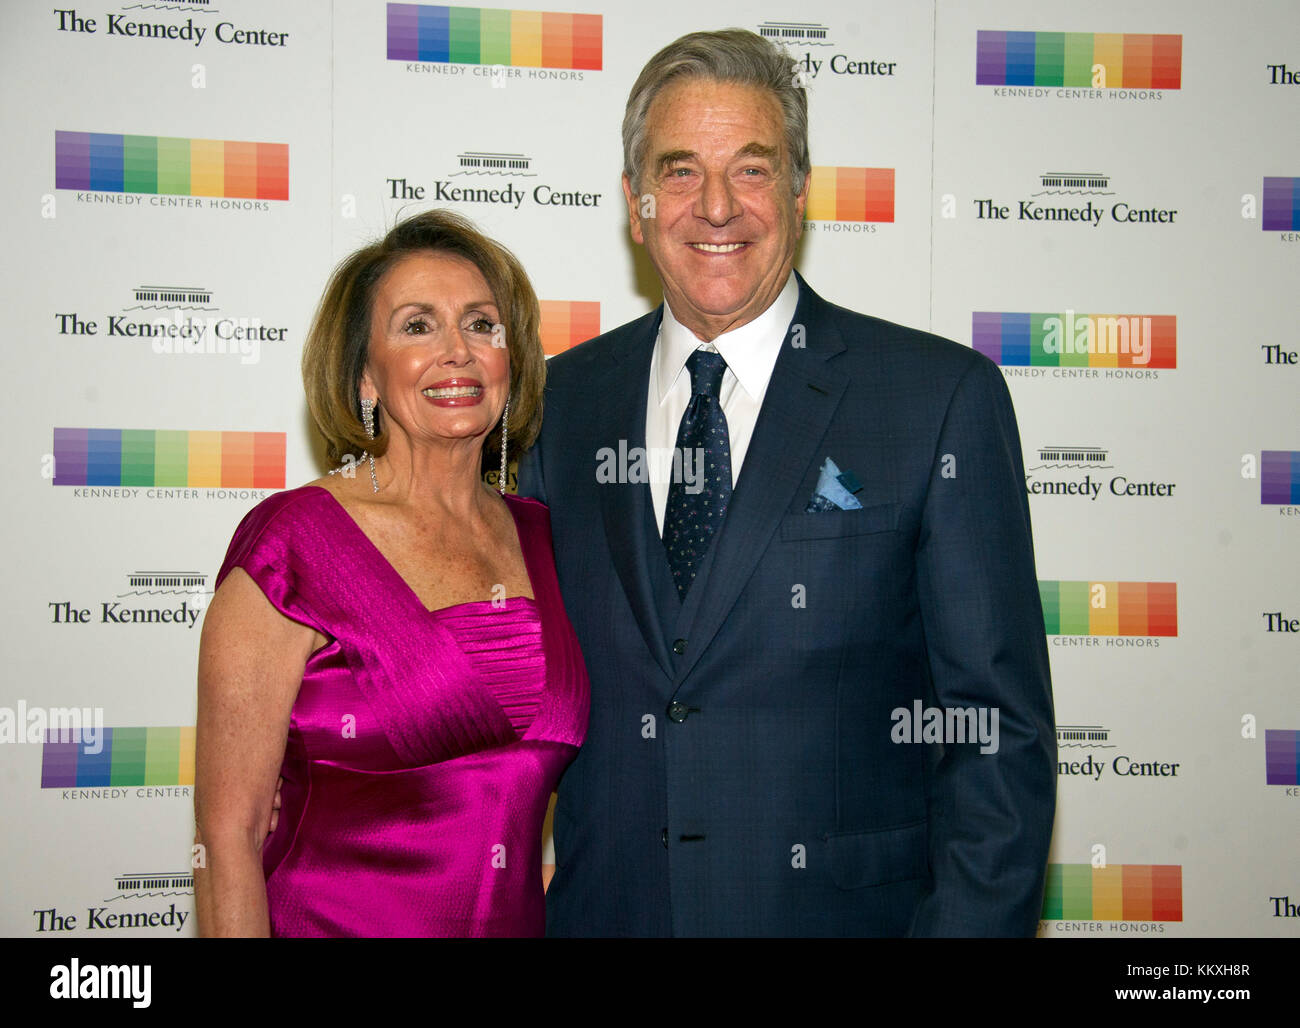 Washington DC, USA. 2nd December, 2017. United States House Minority Leader Nancy Pelosi (Democrat of California) and her husband, Paul, arrive for the formal Artist's Dinner honoring the recipients of the 40th Annual Kennedy Center Honors hosted by United States Secretary of State Rex Tillerson at the US Department of State in Washington, DC on Saturday, December 2, 2017. The 2017 honorees are: American dancer and choreographer Carmen de Lavallade; Cuban American singer-songwriter and actress Gloria Estefan; ; American television writer Credit: MediaPunch Inc/Alamy Live News Stock Photo